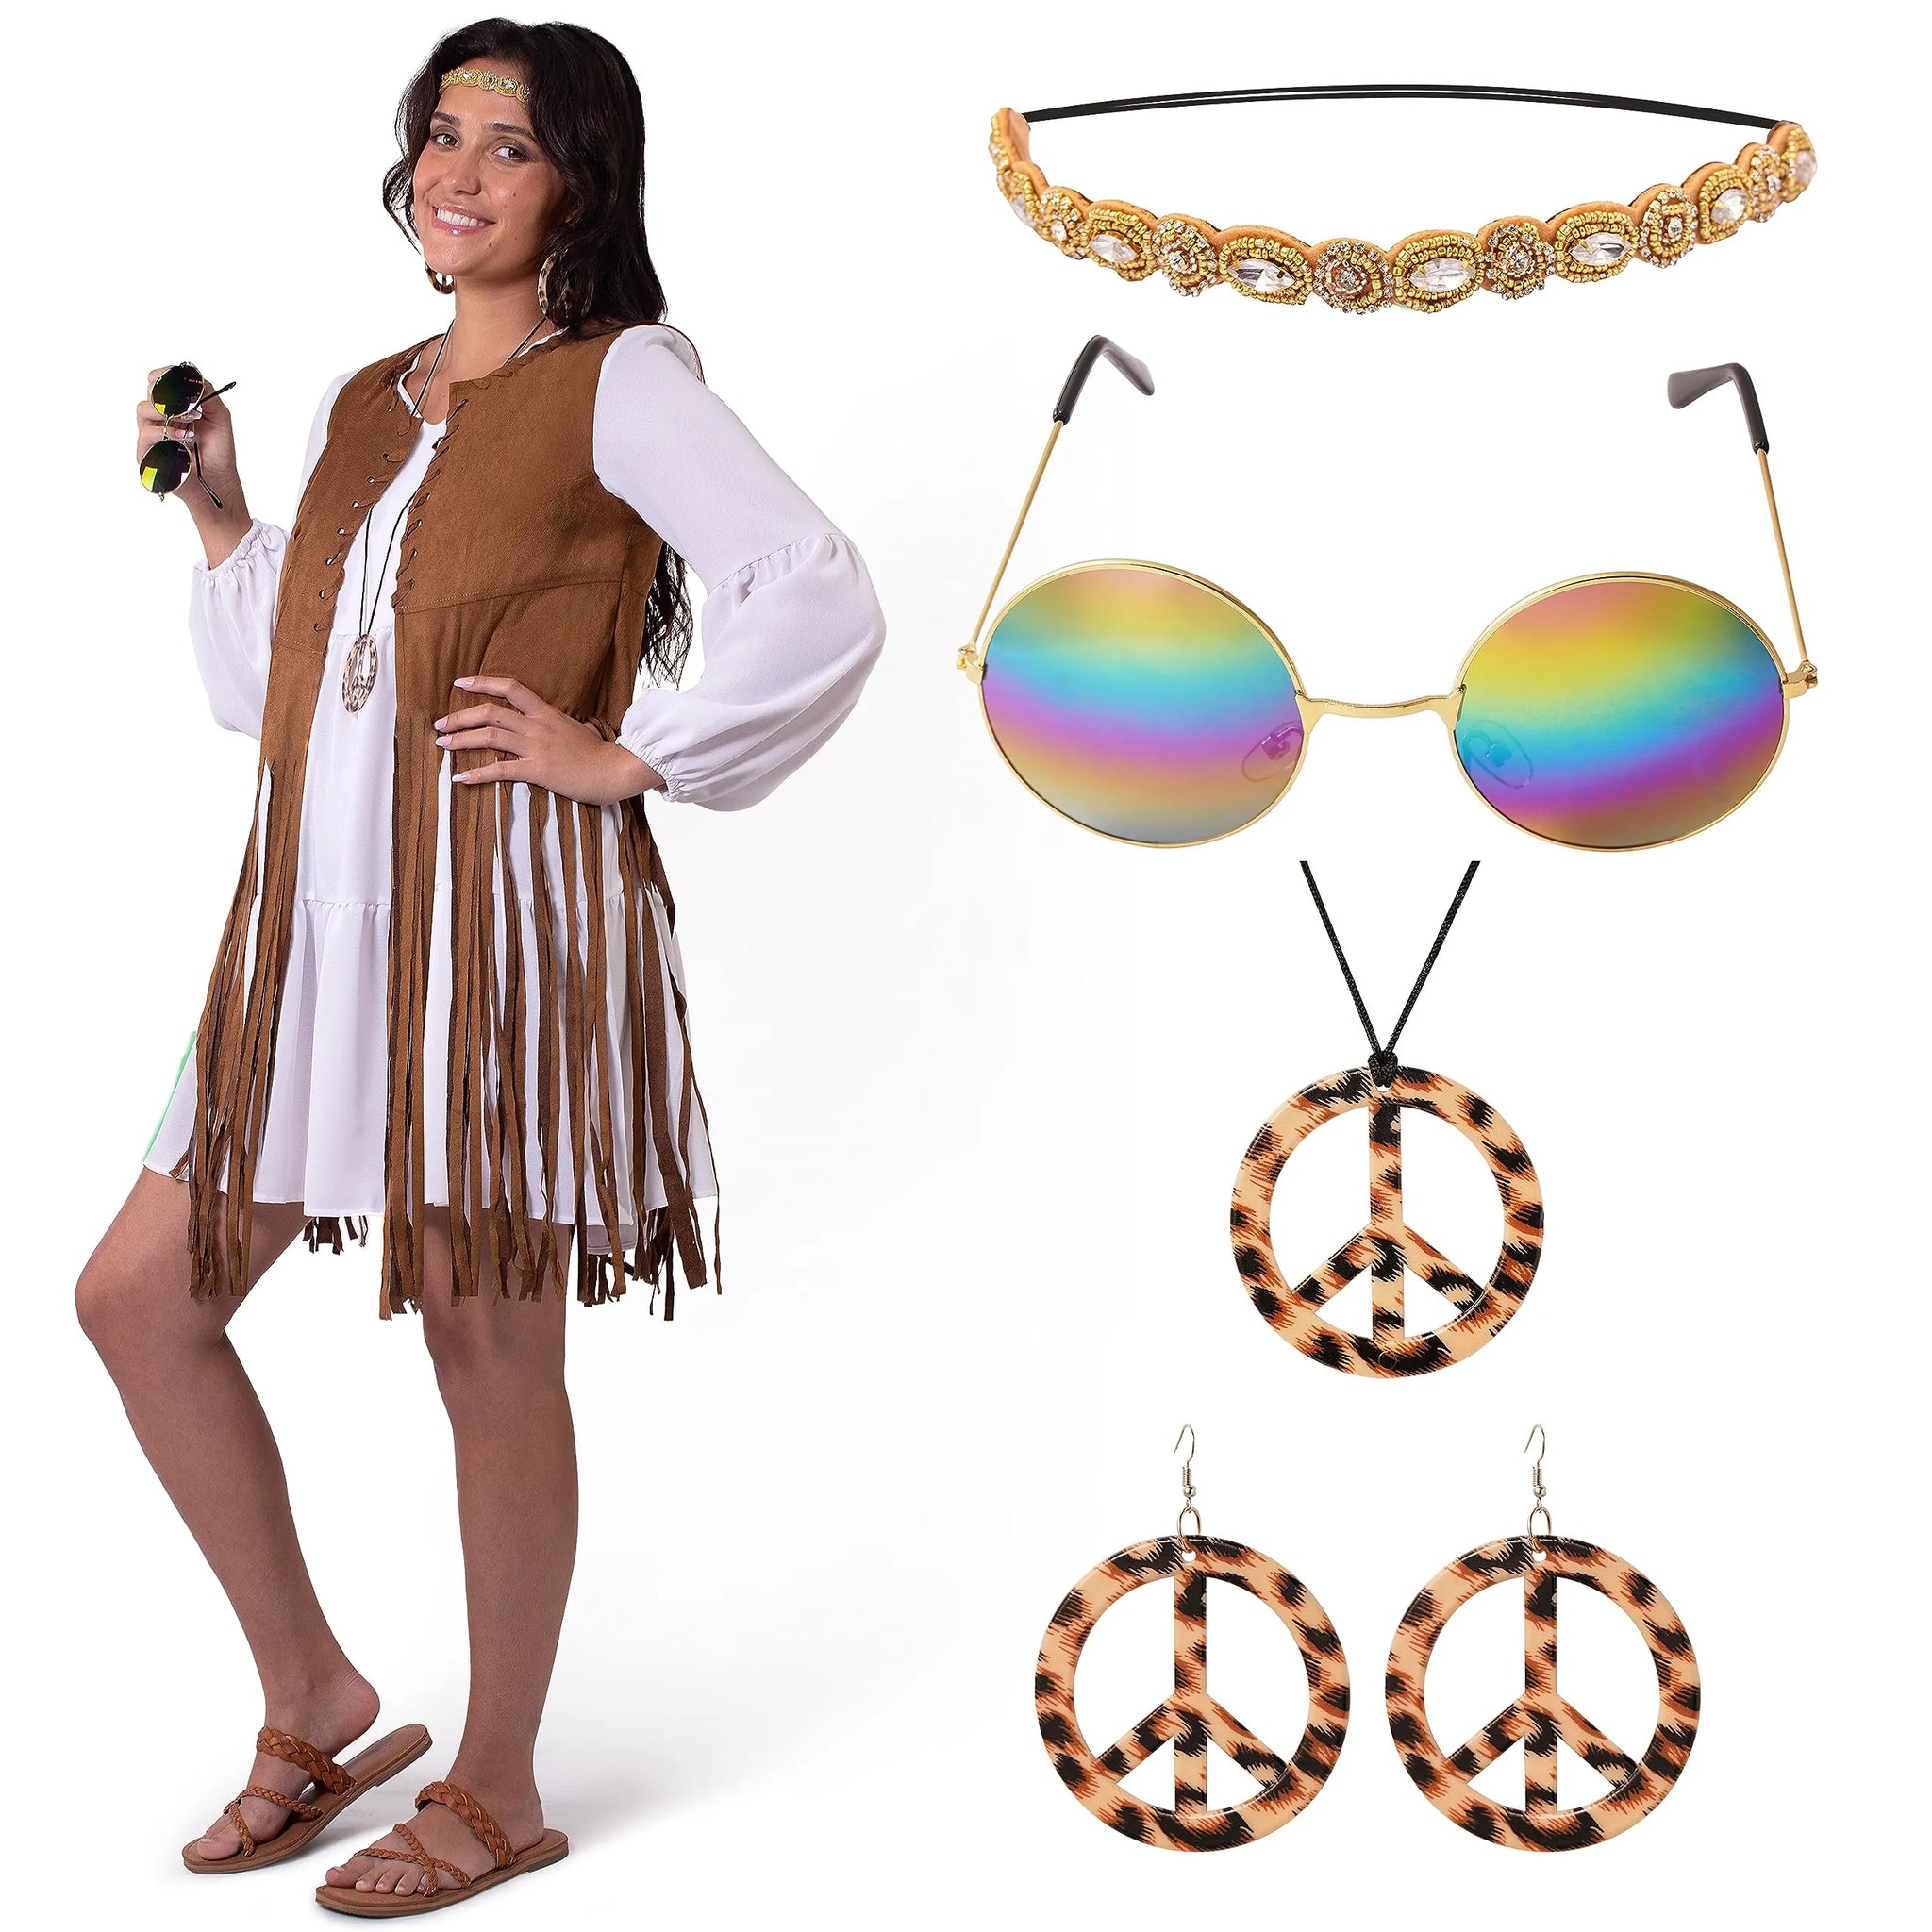 Hippy 60s 70s outfit, costume inspiration